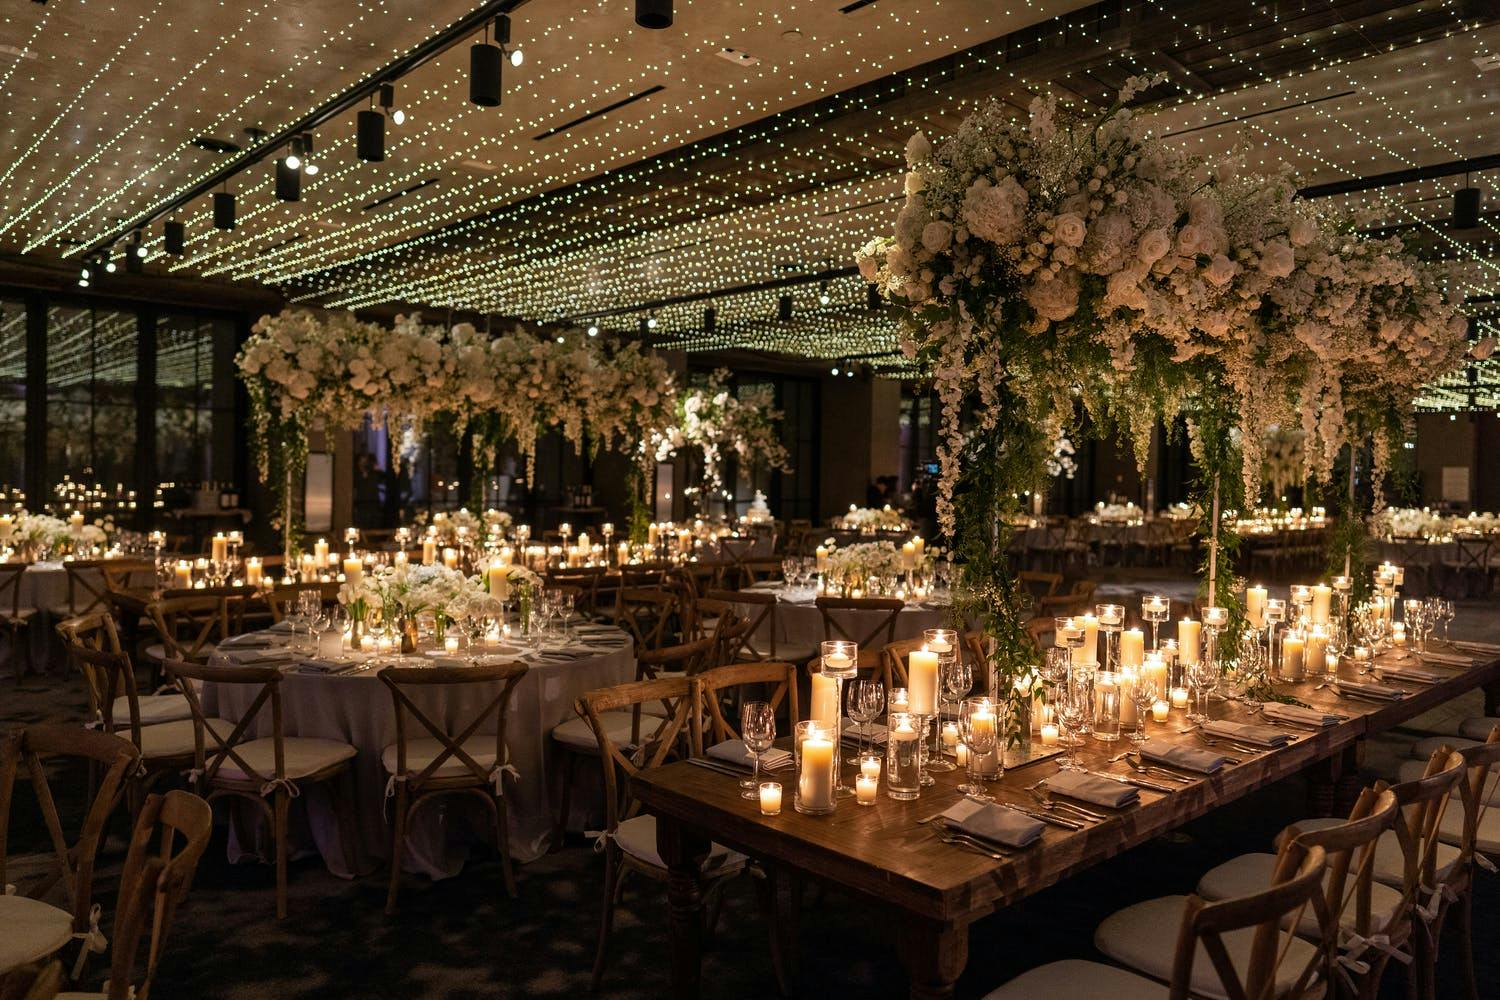 Wedding Ballroom With Canopy of Twinkling String Lights | PartySlate